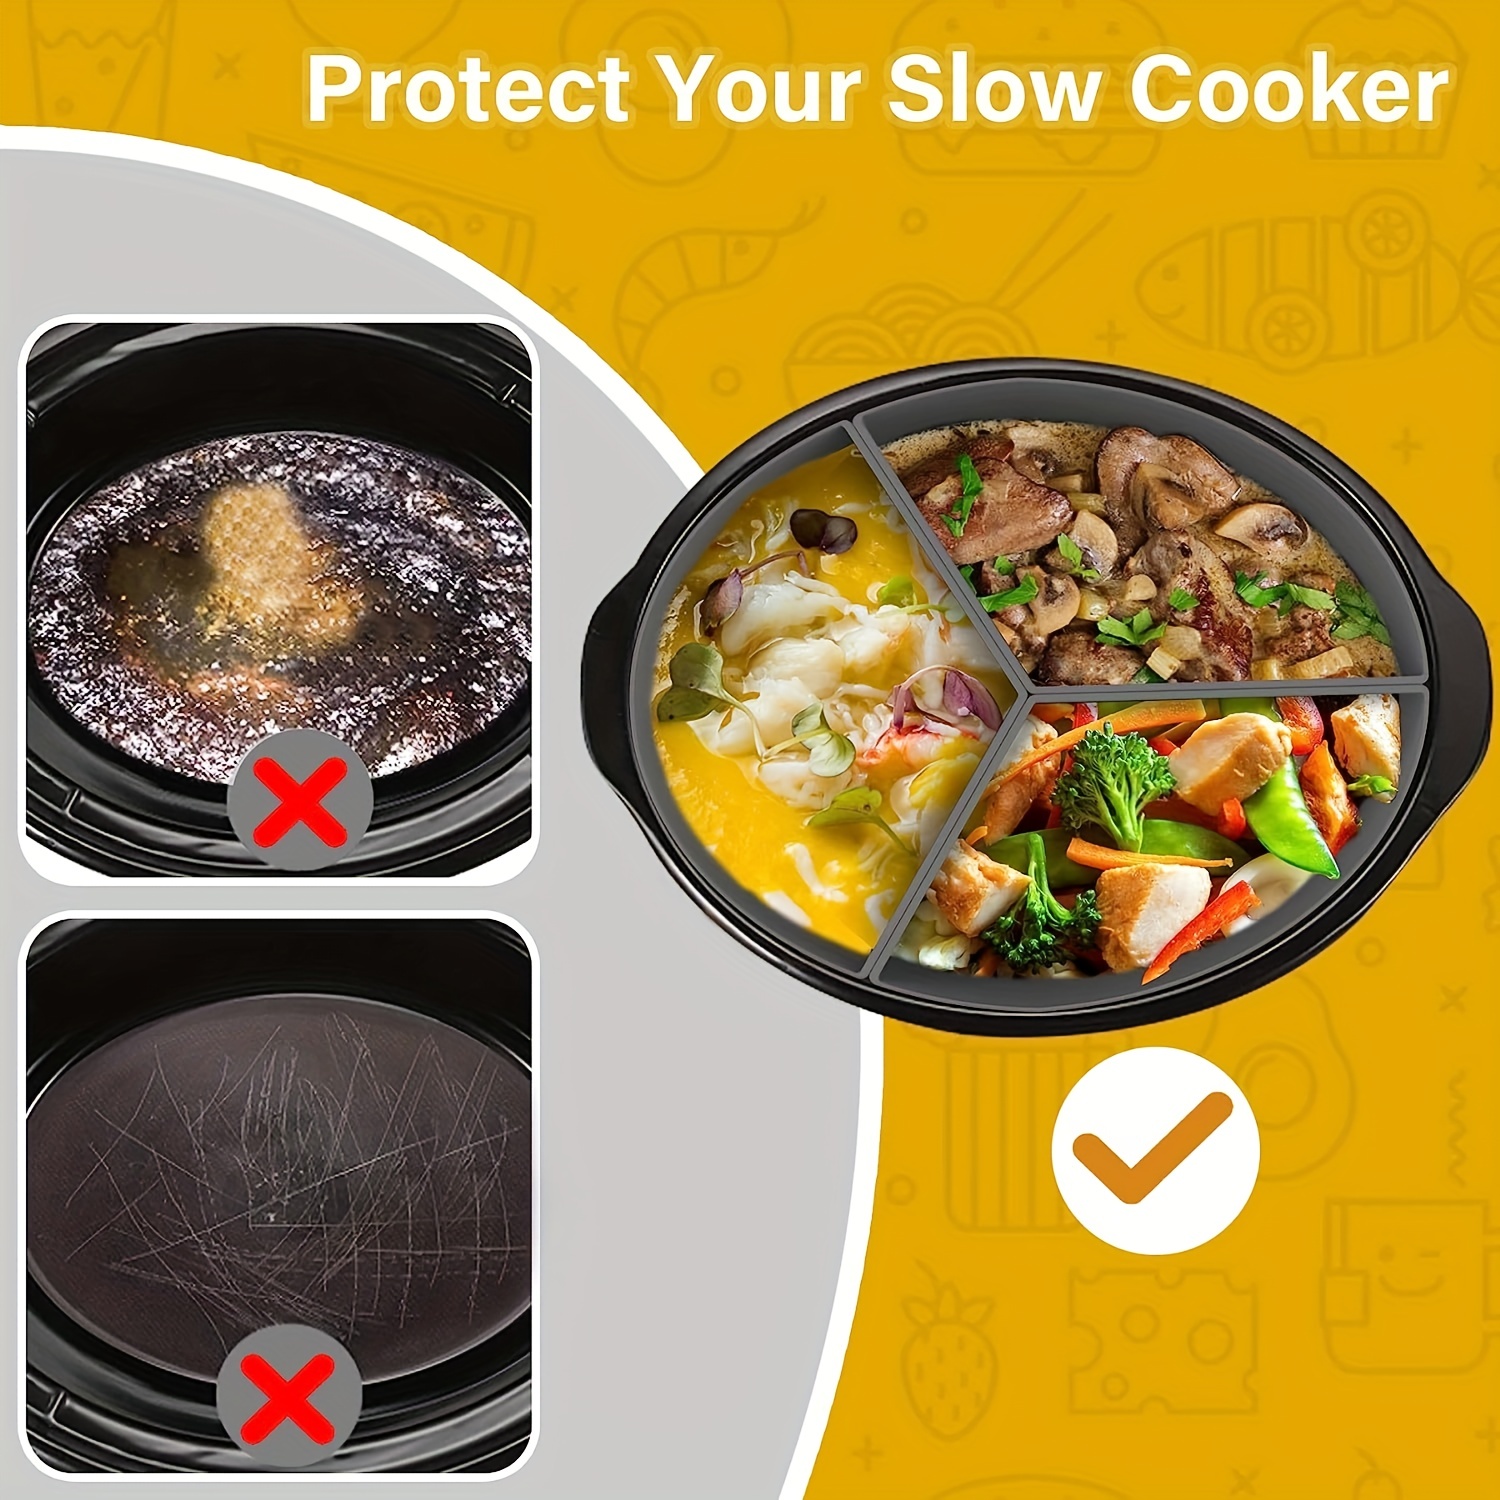  PotDivider Silicone Slow Cooker Liners Insert Fit for 8 QT Oval  Crockpot Reusable Two-in-One Slow Cooker Divider - Leakproof and Dishwasher  Safe Slow Cooker Accessories: Home & Kitchen